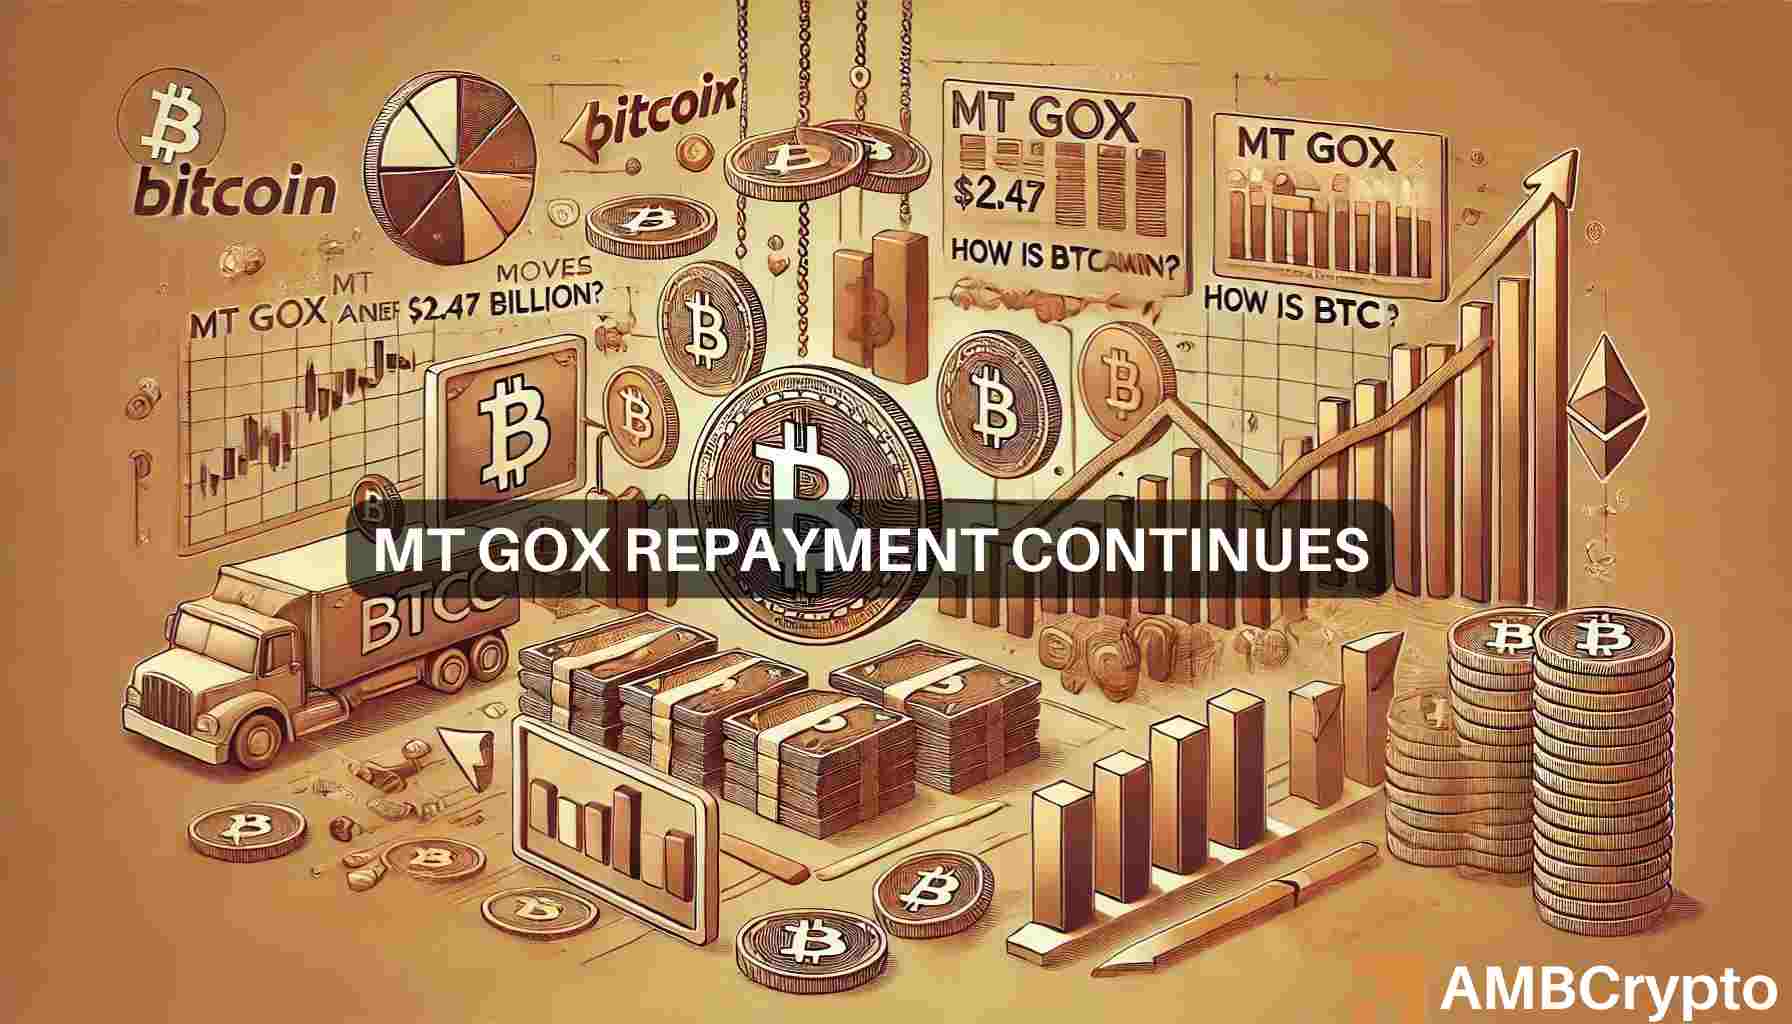 Mt. Gox moves another $2.47B of Bitcoin: How is BTC price faring?